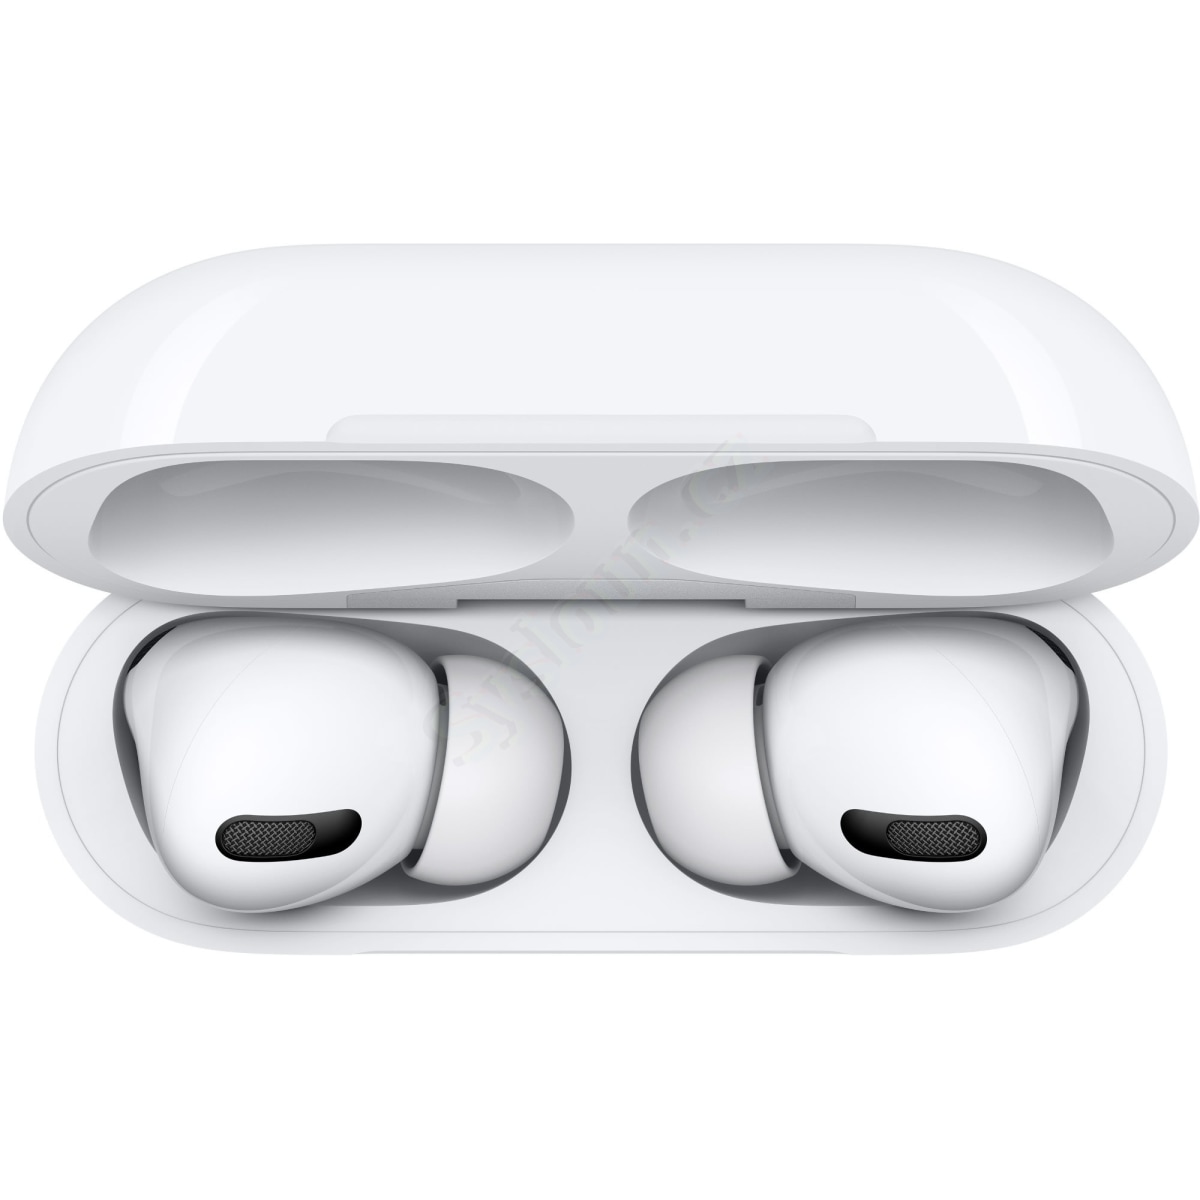 Apple AirPods Pro (2019)